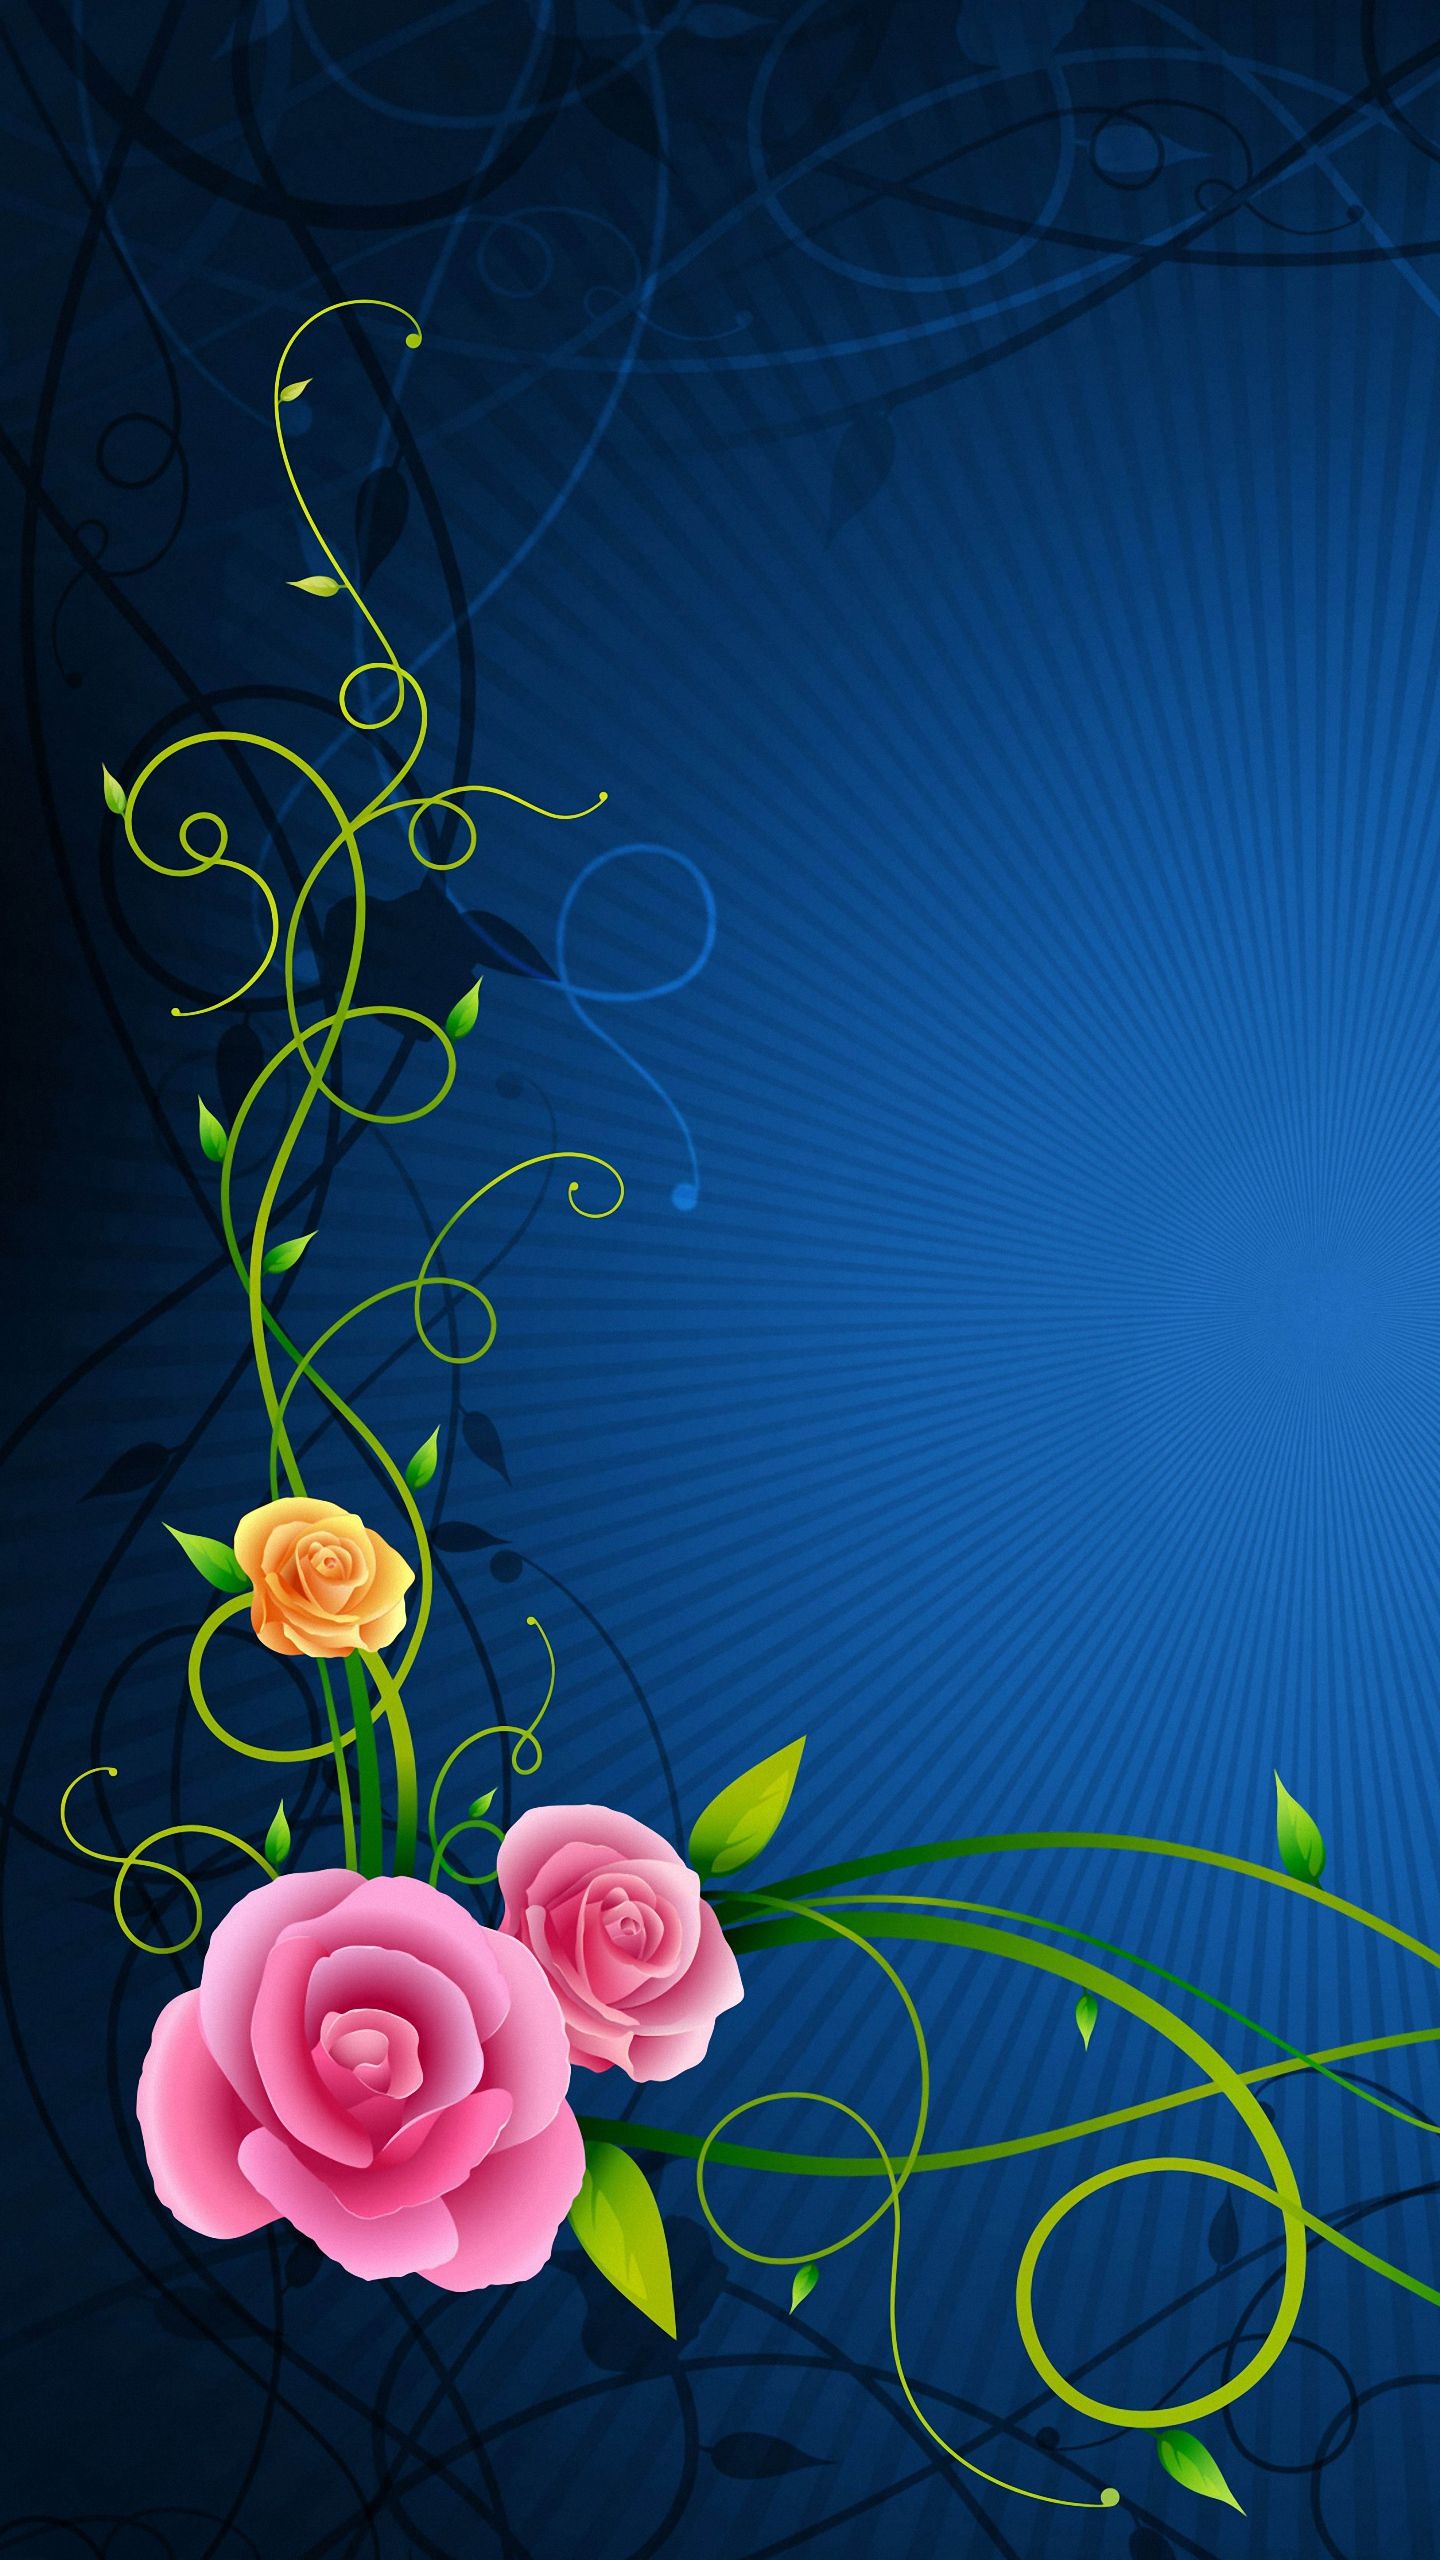 Free download s6 HD 1440x2560 flowers lines patterns samsung galaxy s6 wallpaper [1440x2560] for your Desktop, Mobile & Tablet. Explore Samsung Galaxy S6 Wallpaper Size. Samsung S6 Wallpaper, Galaxy